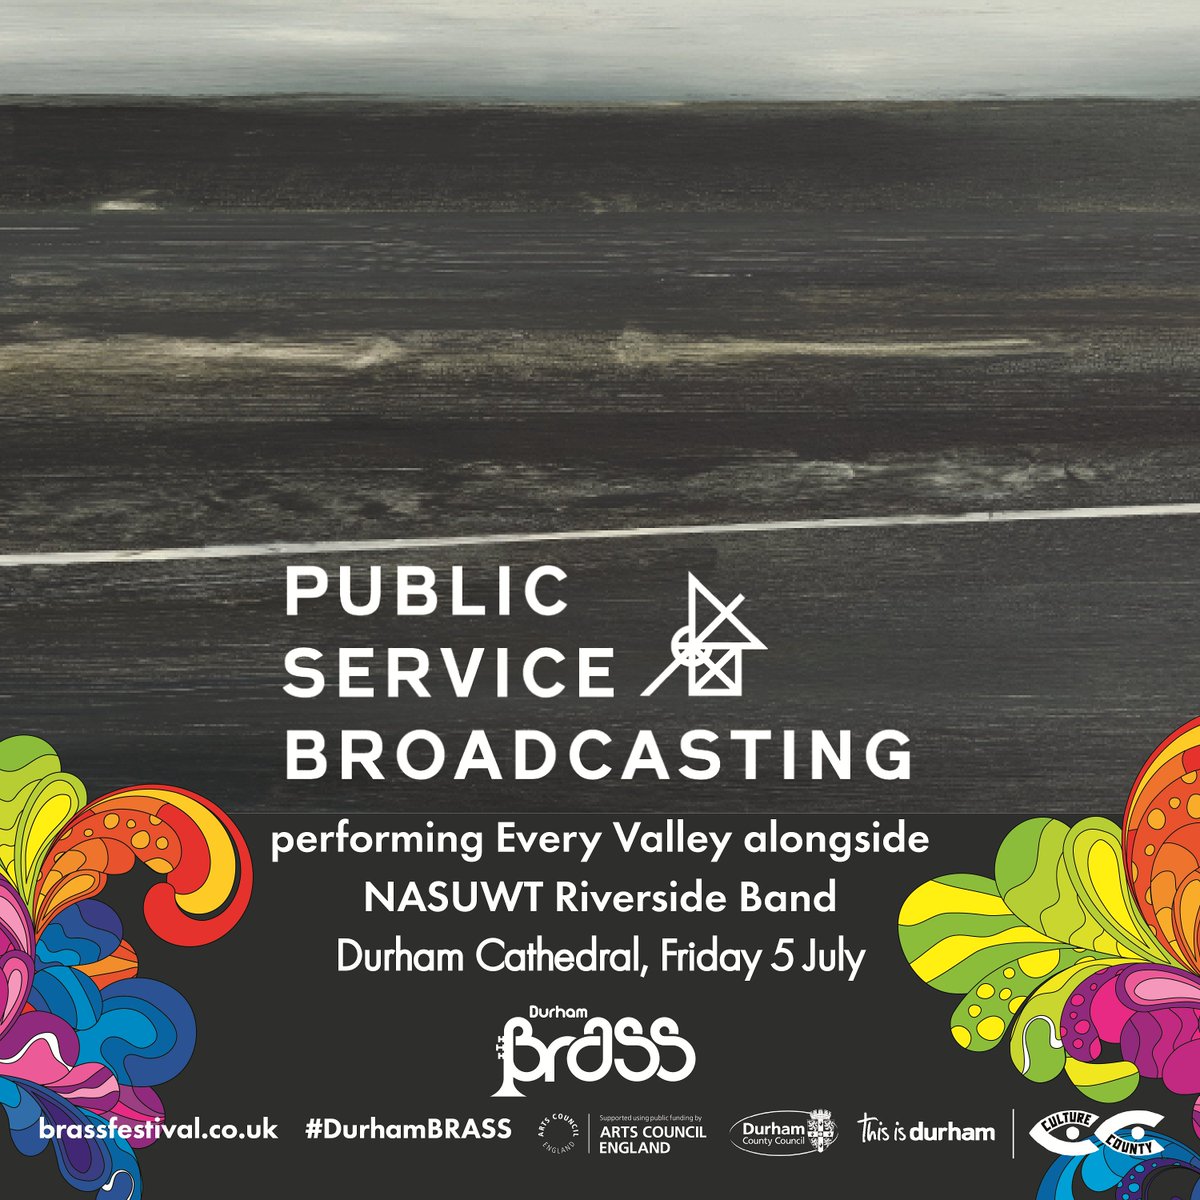 We are thrilled to announce Public Service Broadcasting @PSB_HQ will be headlining the opening night of #DurhamBrass 2024, performing their renowned 2017 album Every Valley at @durhamcathedral alongside @NASUWTRiverside Tickets on sale 9am Fri 22 March: brassfestival.co.uk/brass/public-s…